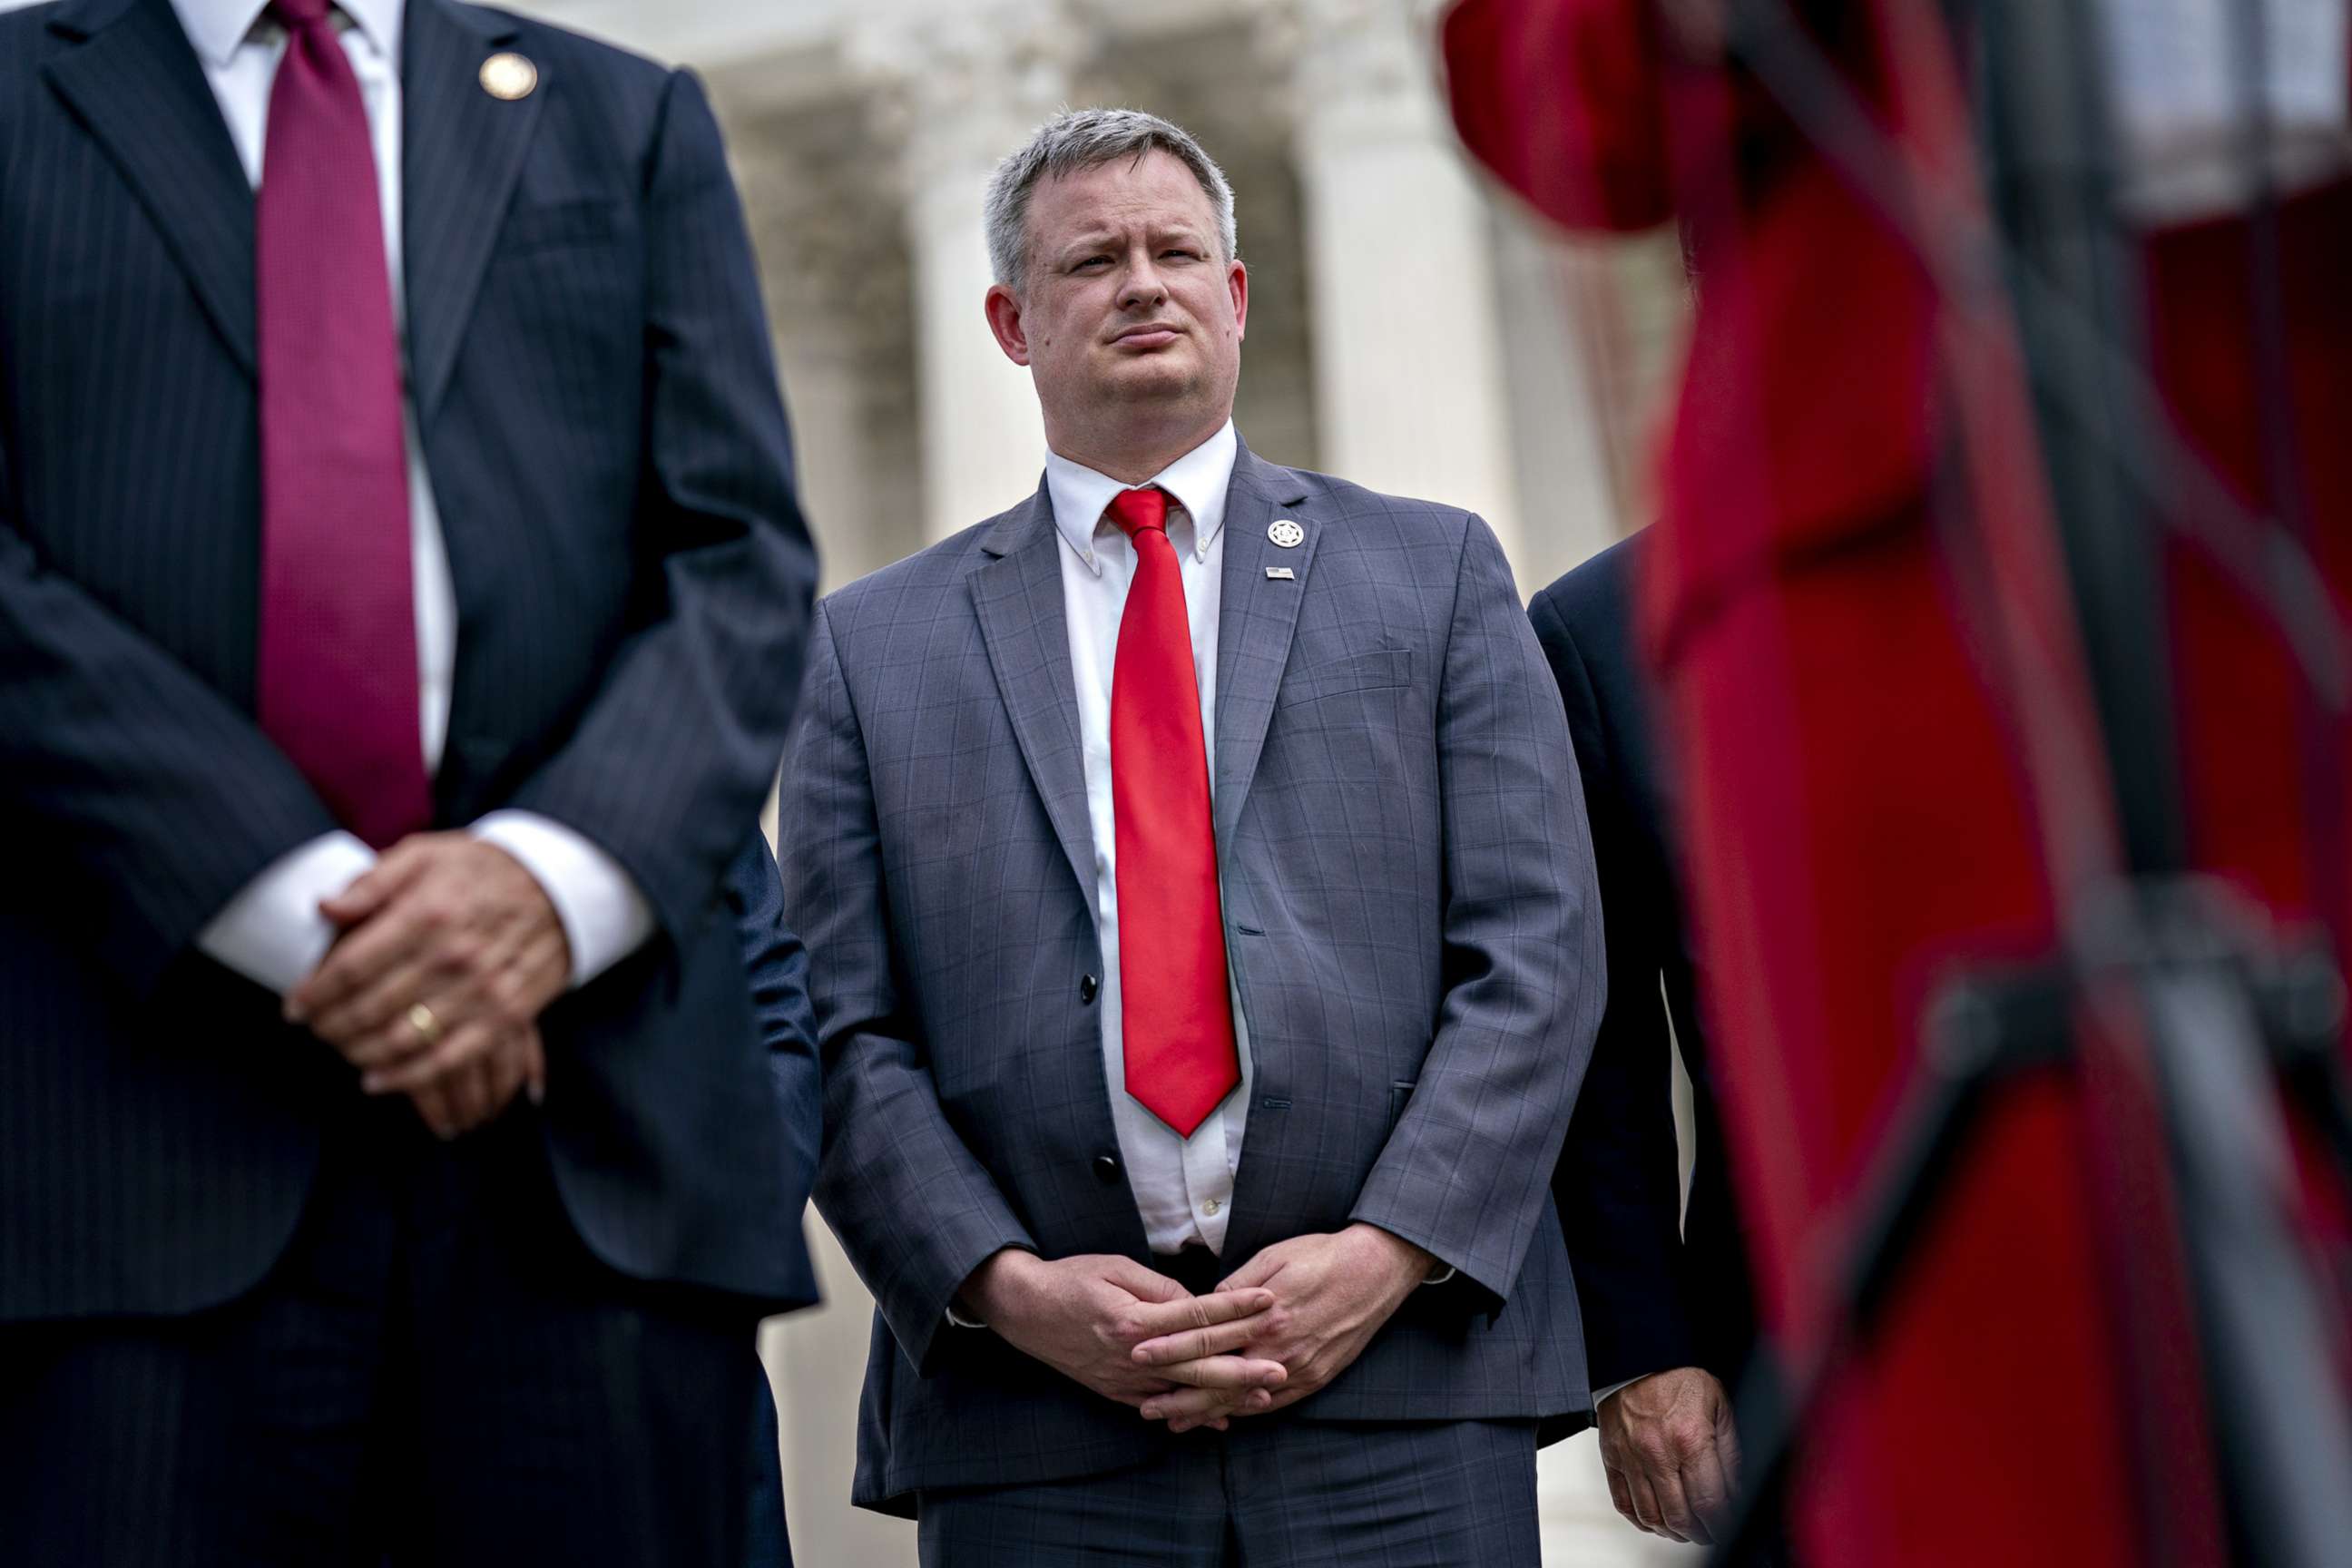 PHOTO: Jason Ravnsborg, South Dakota attorney general, listens during a news conference outside the Supreme Court, Sept. 9, 2019.